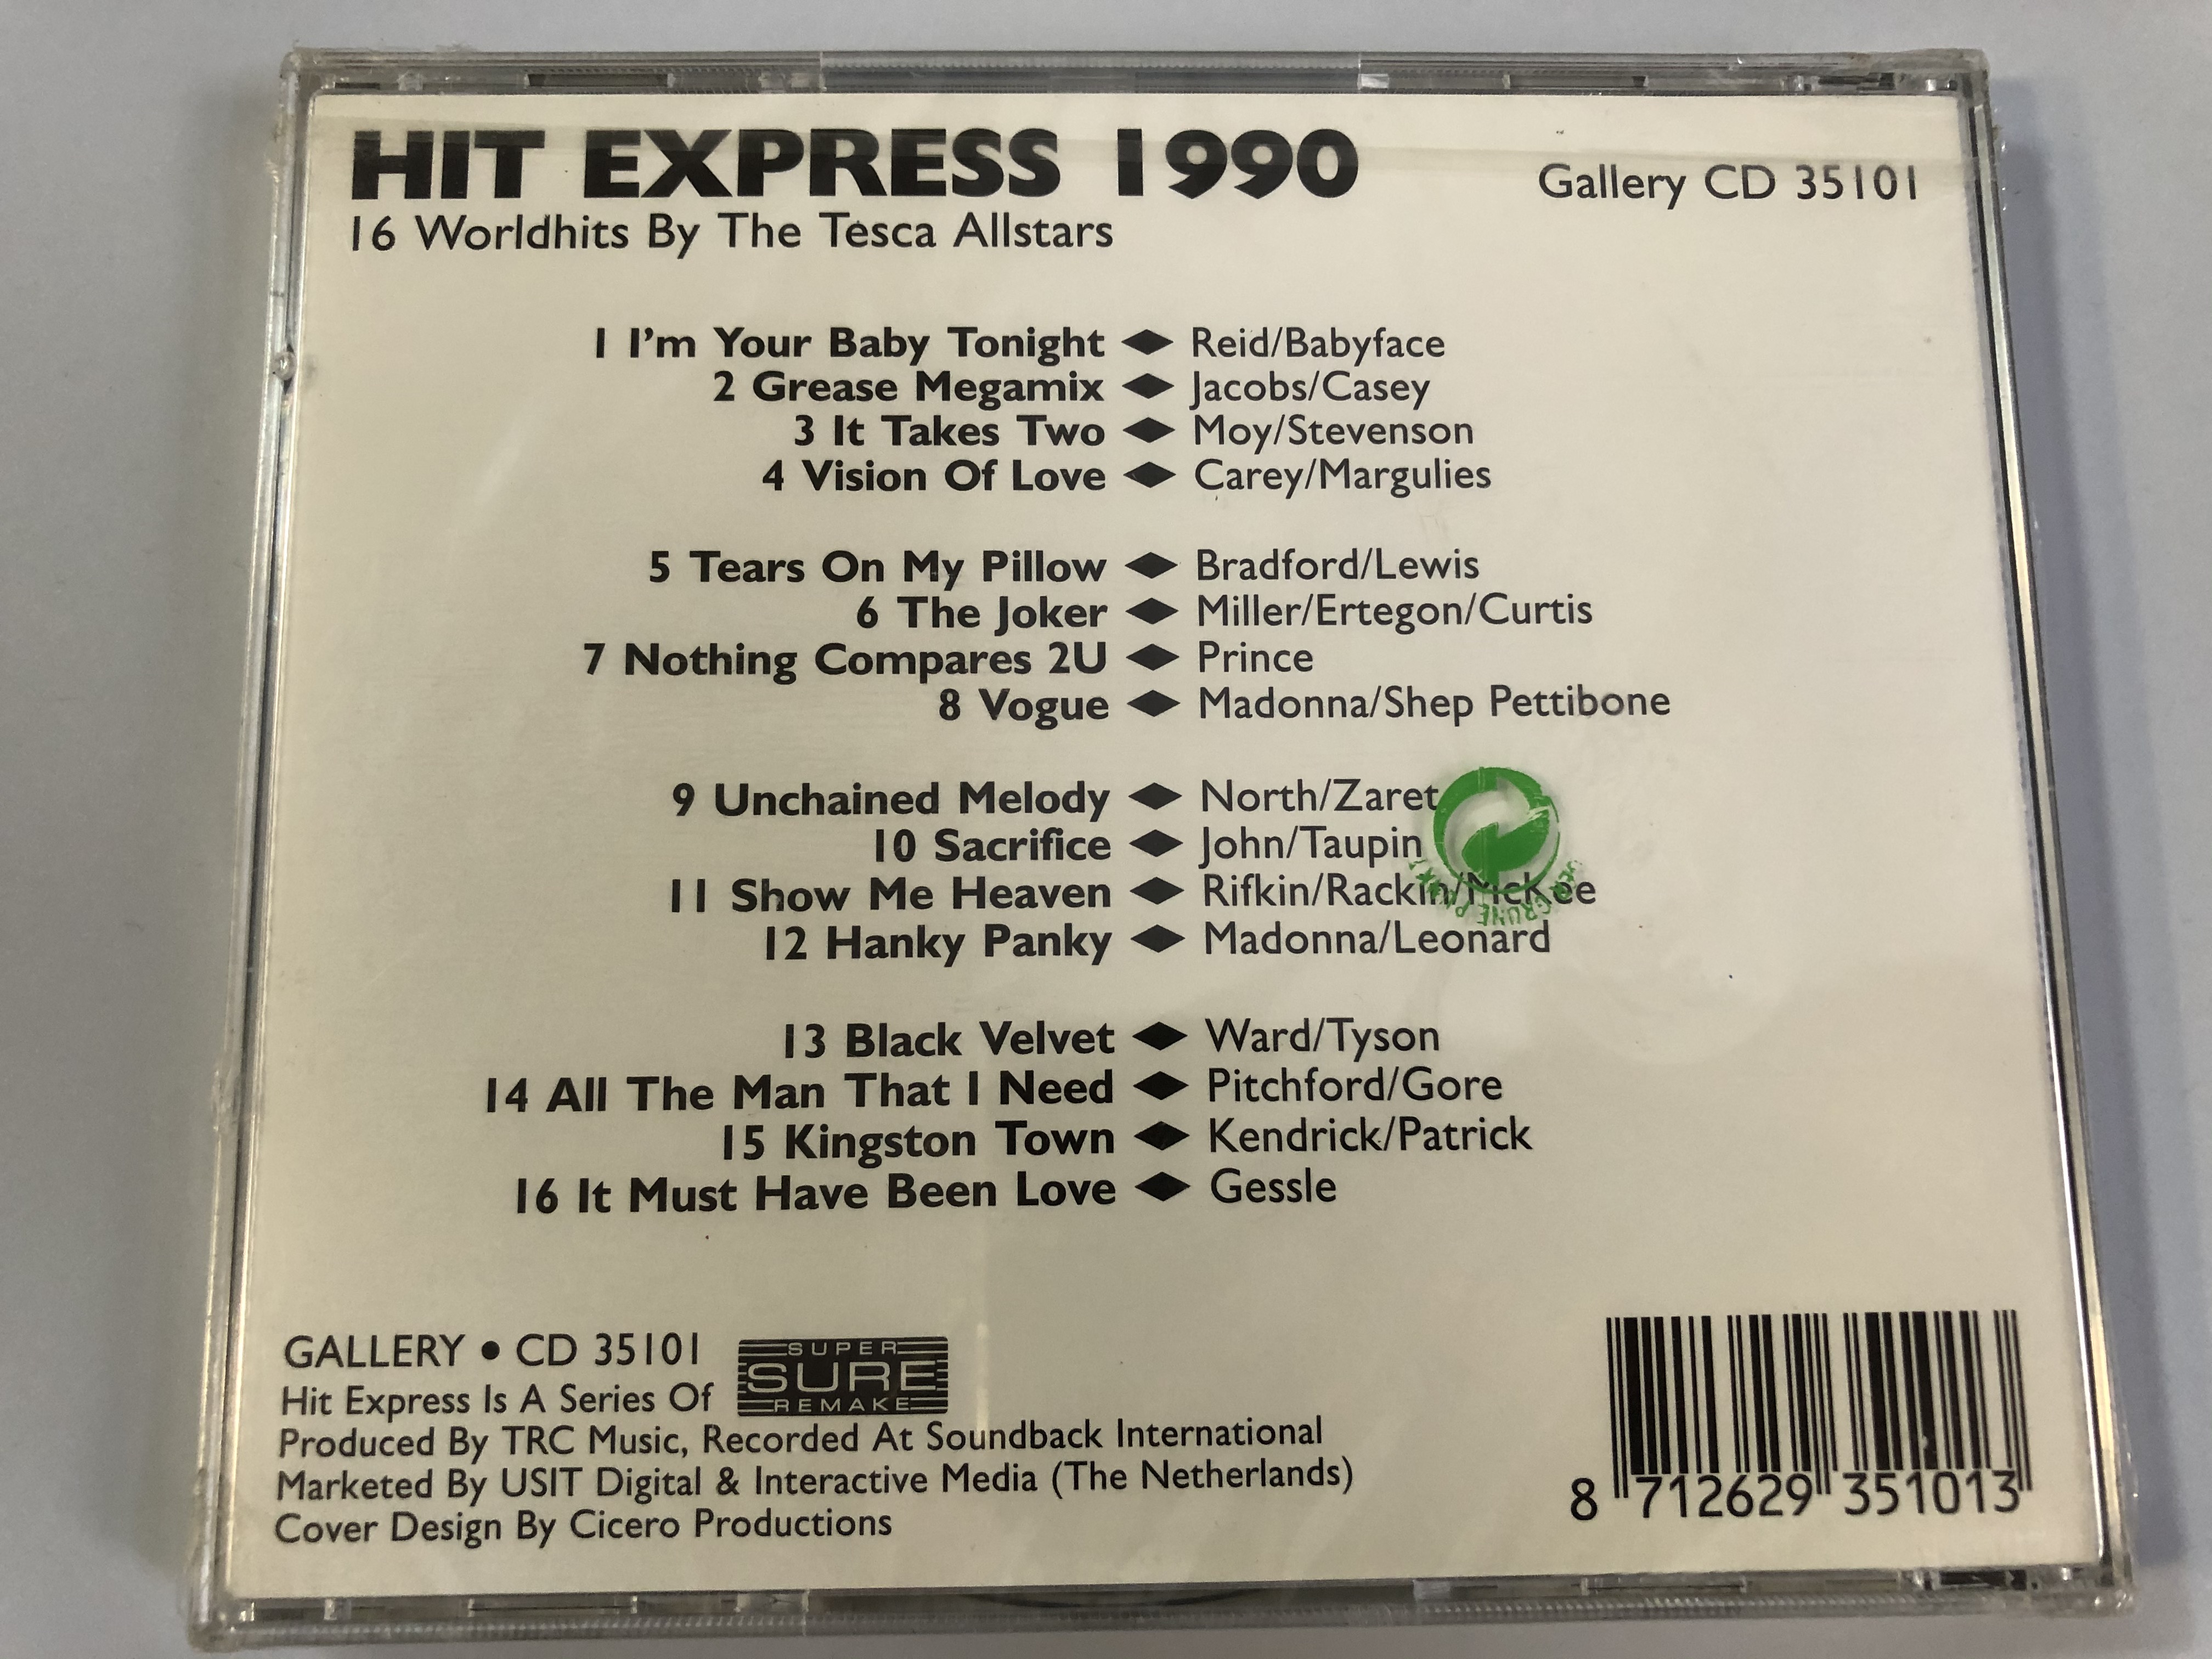 hit-express-1990-featuring-sacrifice-vision-of-love-grease-megamix-i-m-your-baby-tonight-it-must-have-been-love-and-many-other-worldhits-the-tesca-all-stars-gallery-audio-cd-cd-3.jpg